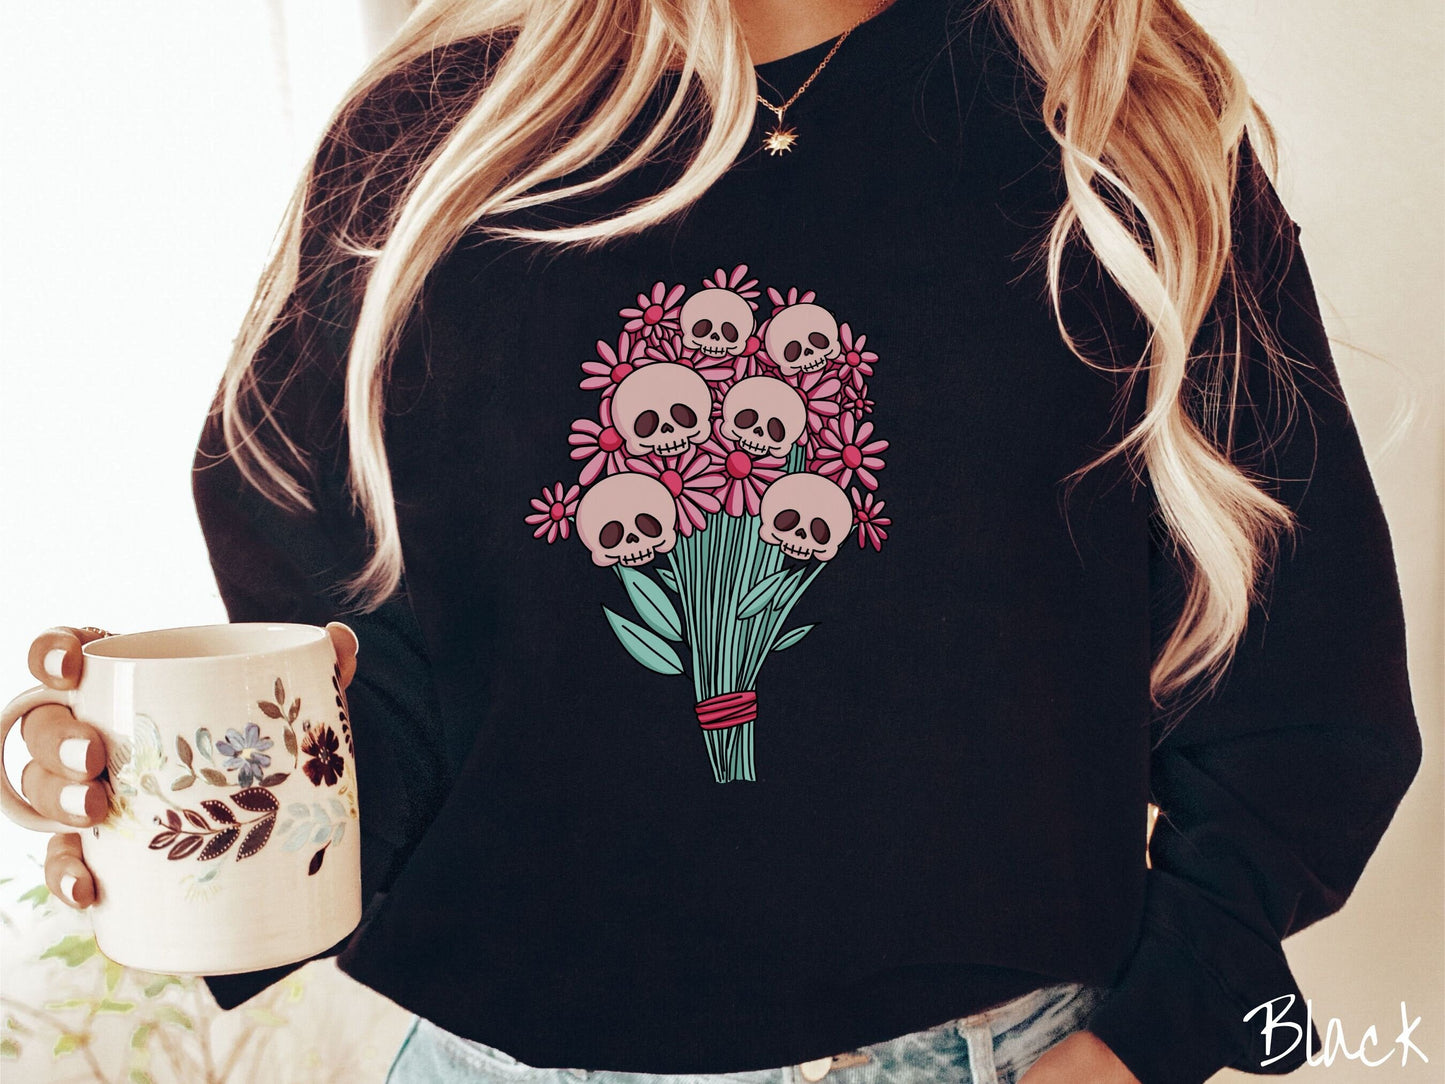 A woman wearing a cute black colored sweatshirt with a spooky flower bouquet with skull heads as the flowers among pink colored flowers.